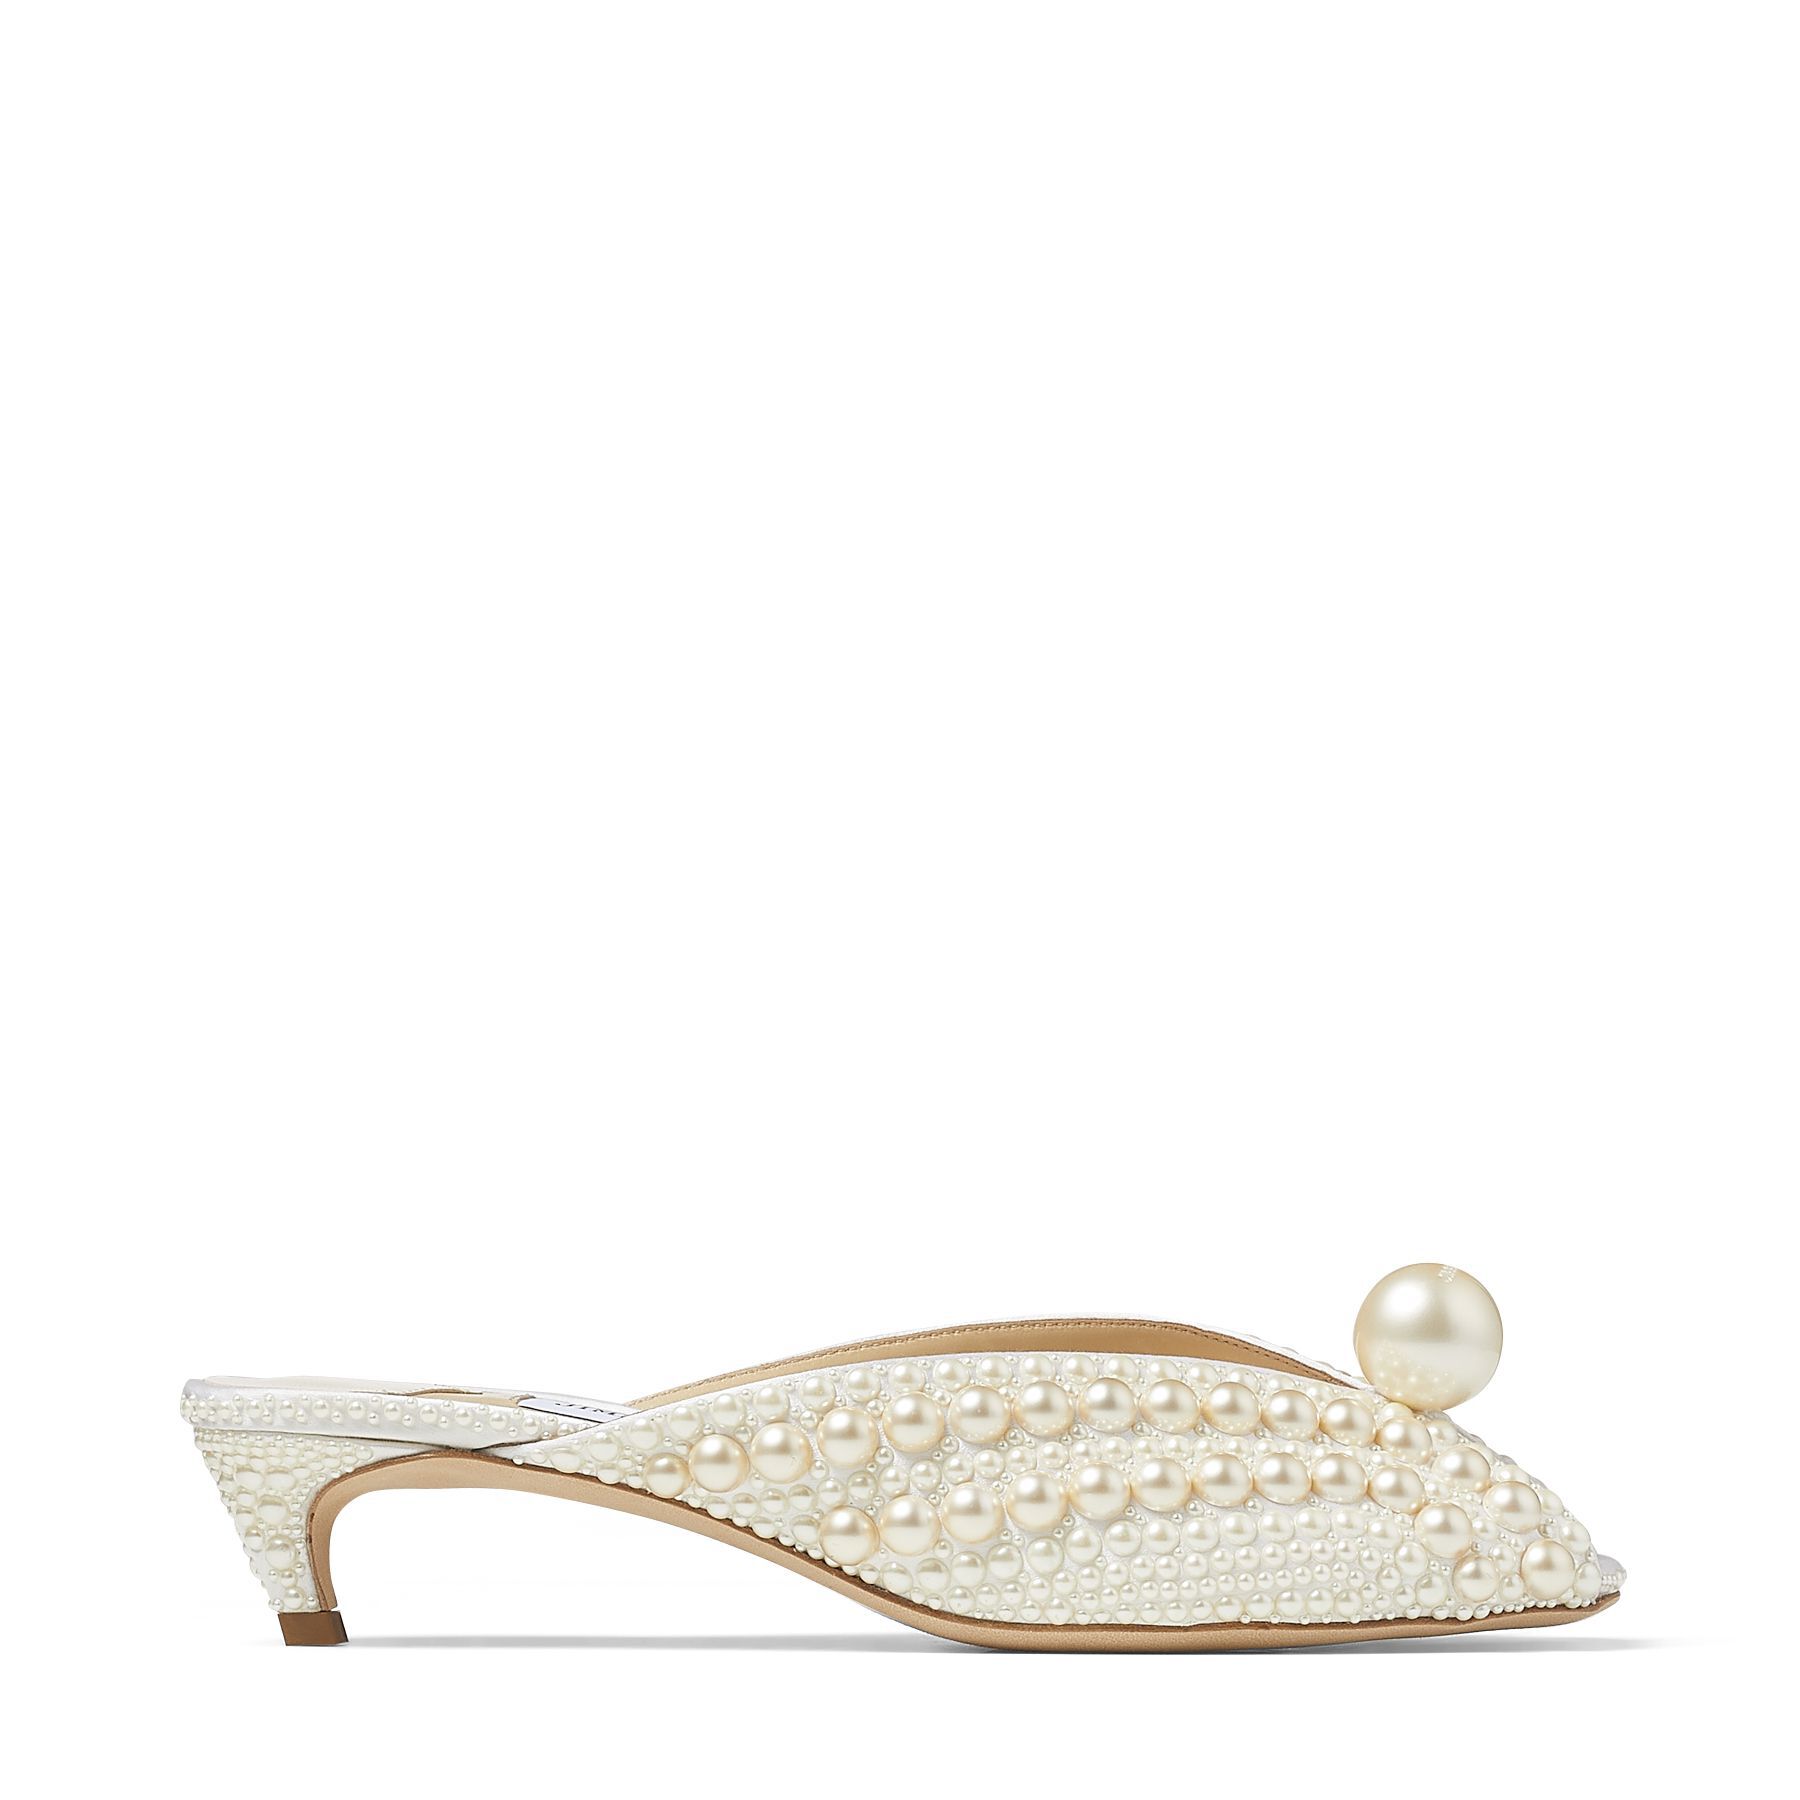 White Satin Mules with All-Over Pearls | SAMANTHA 35 Winter 18 JIMMY CHOO